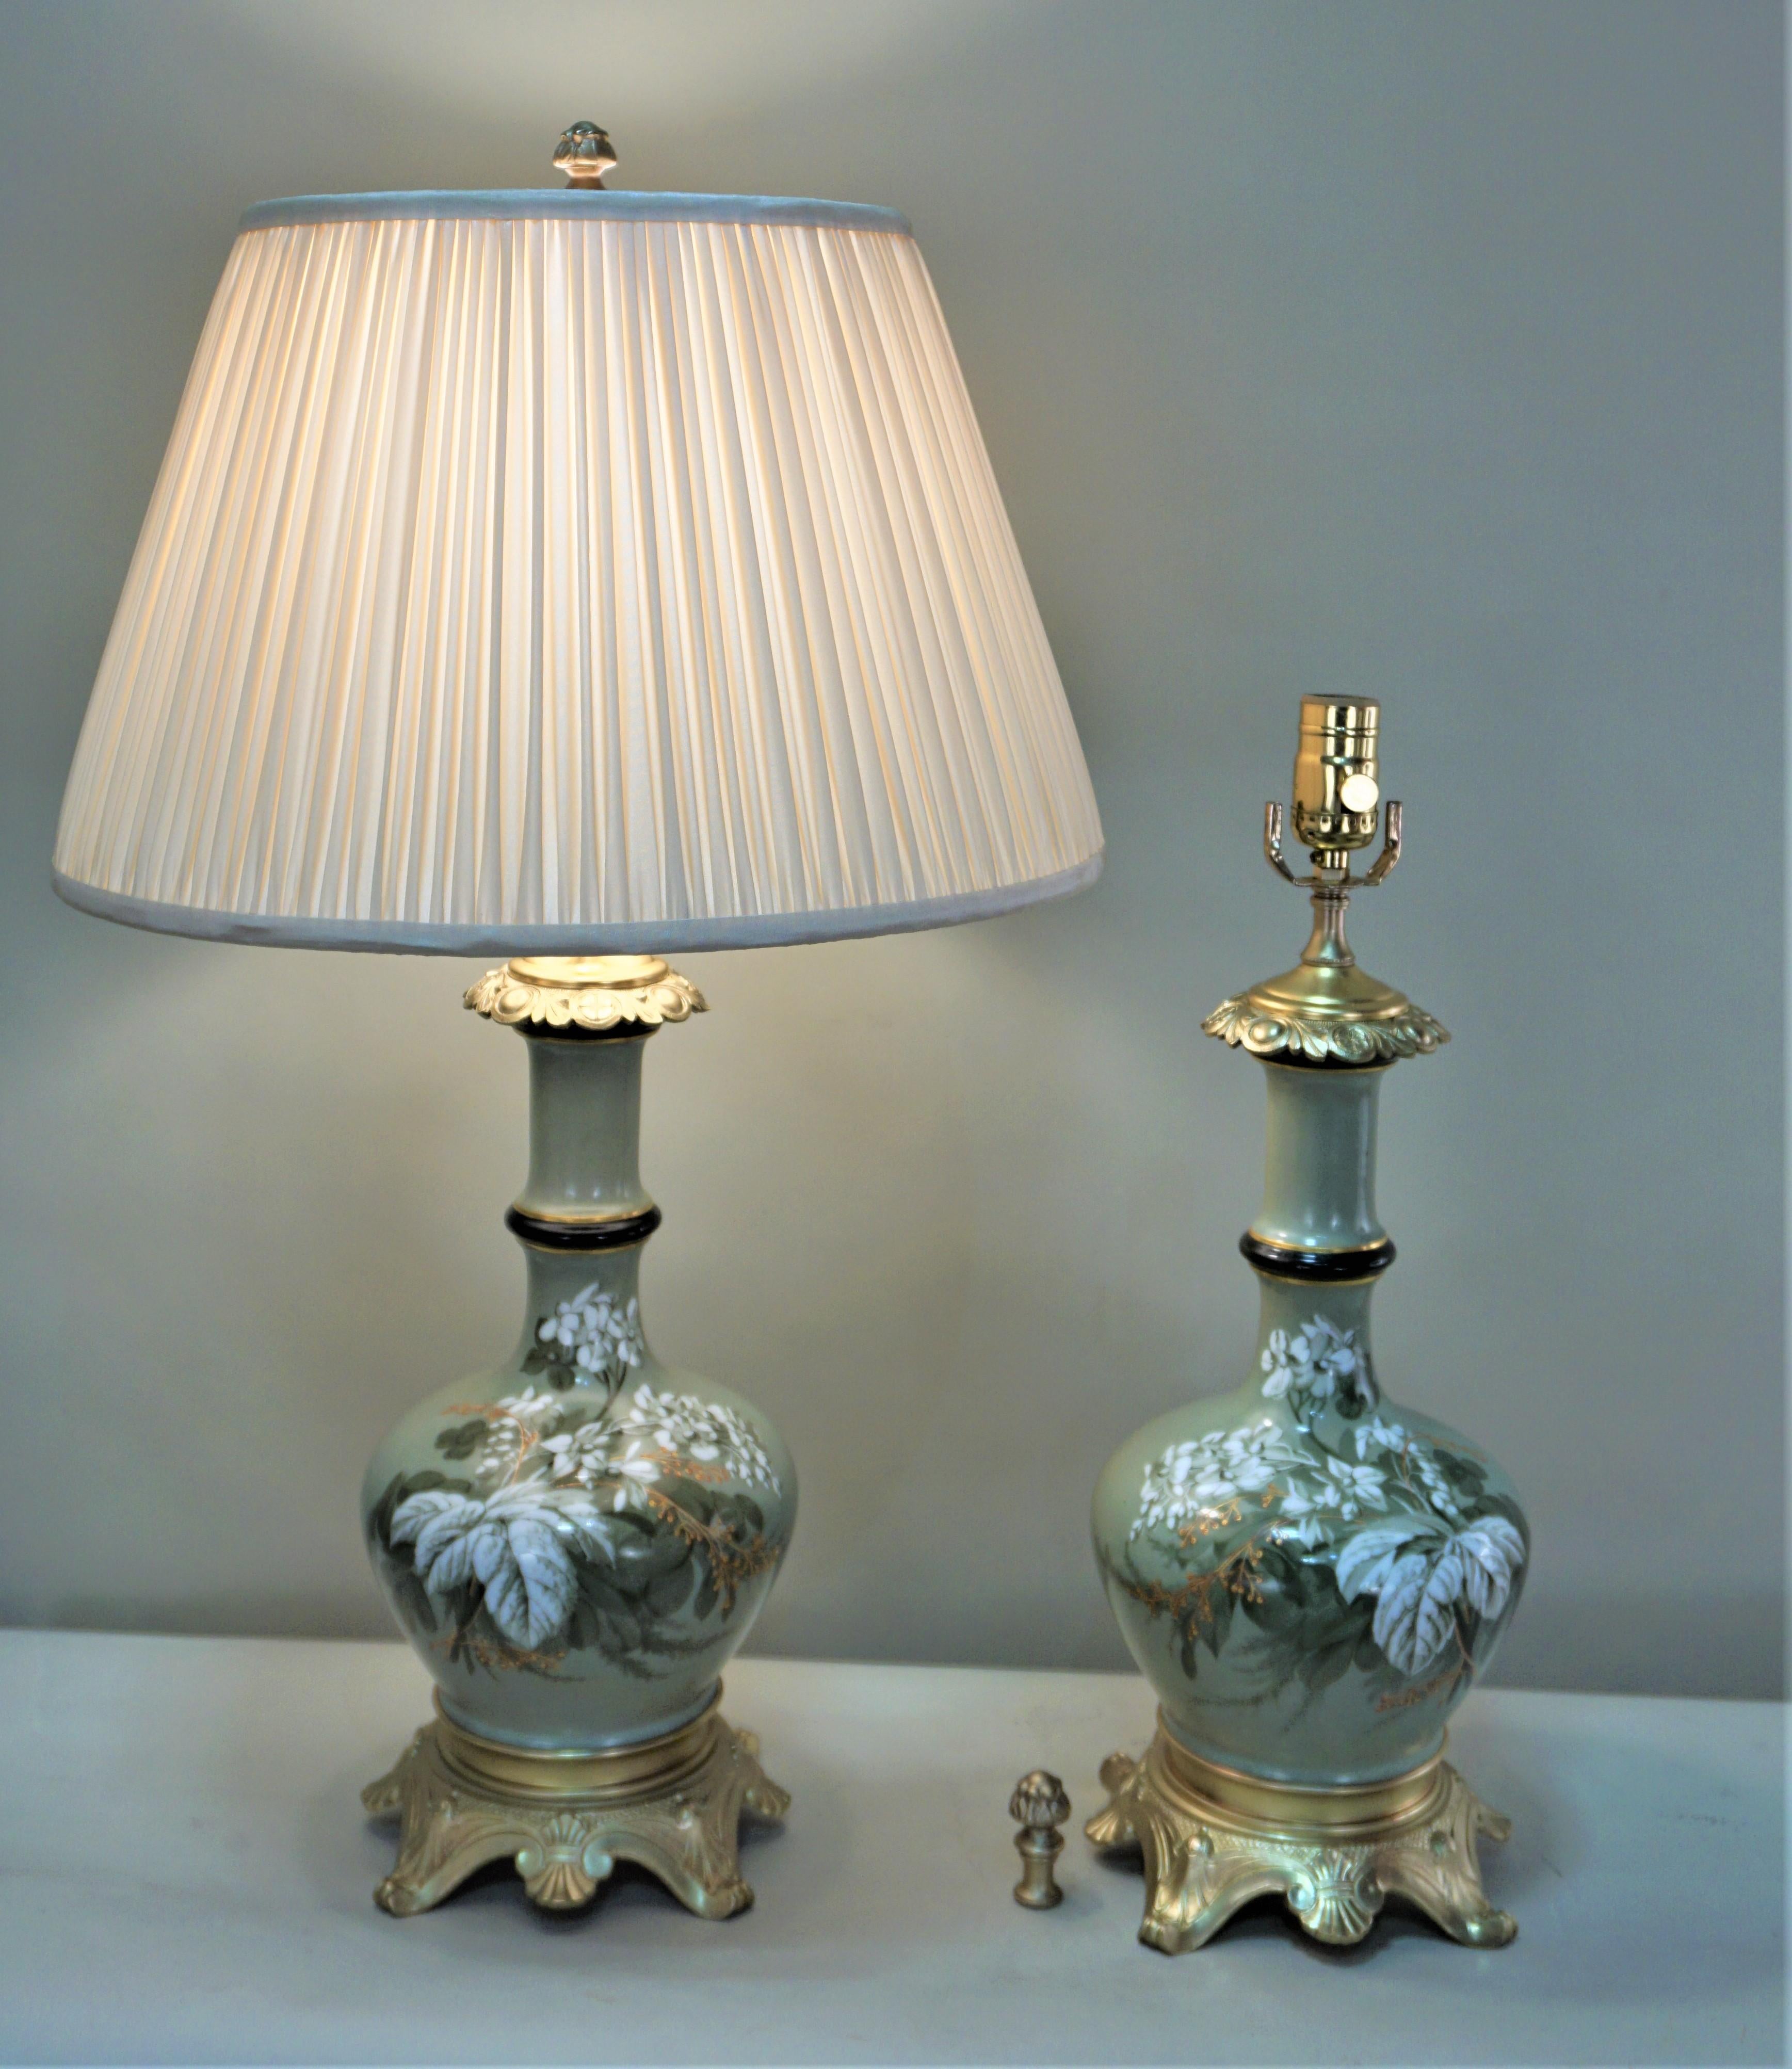 Pair of 19th century hand painted porcelain bronze mounted oil lamps that have been electrified and fitted with hand pleat lampshades.